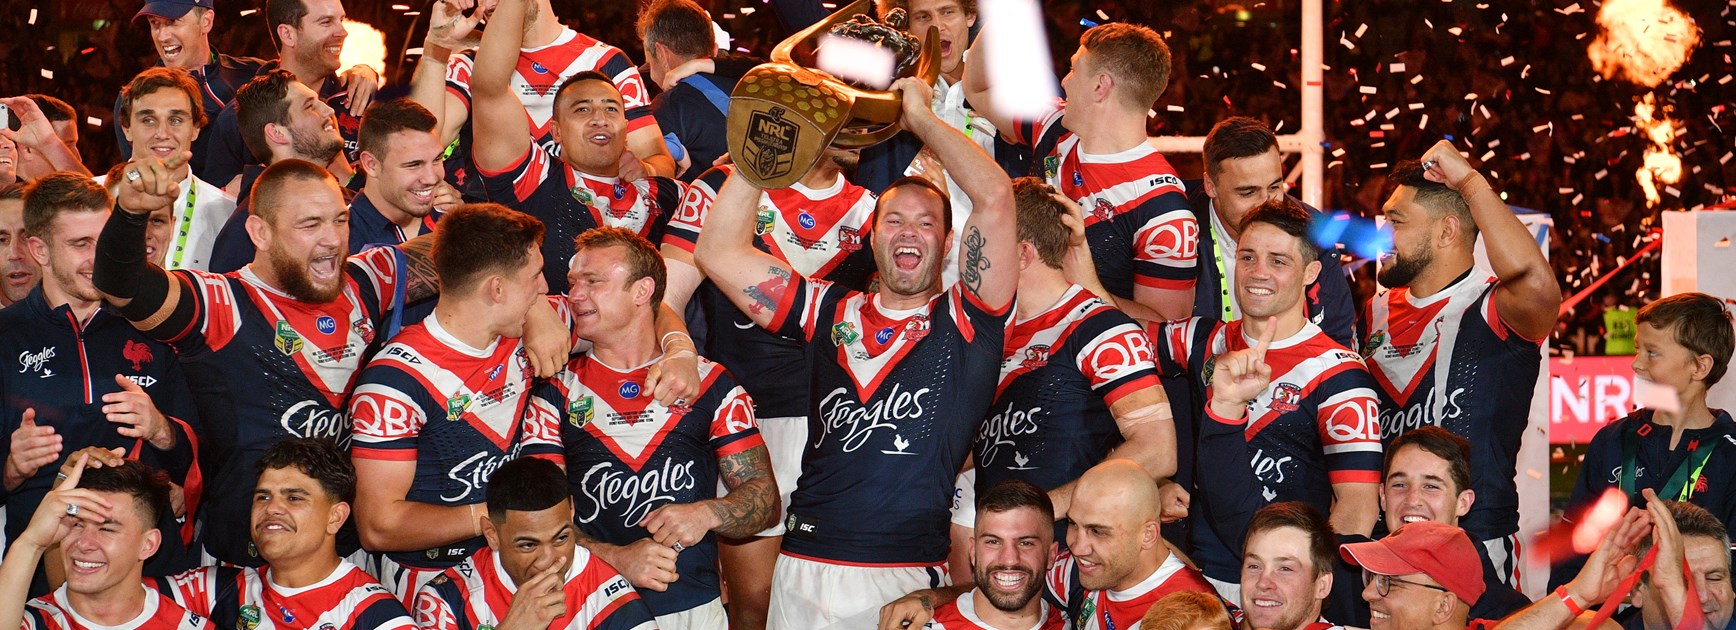 The Roosters after winning the 2018 grand final.